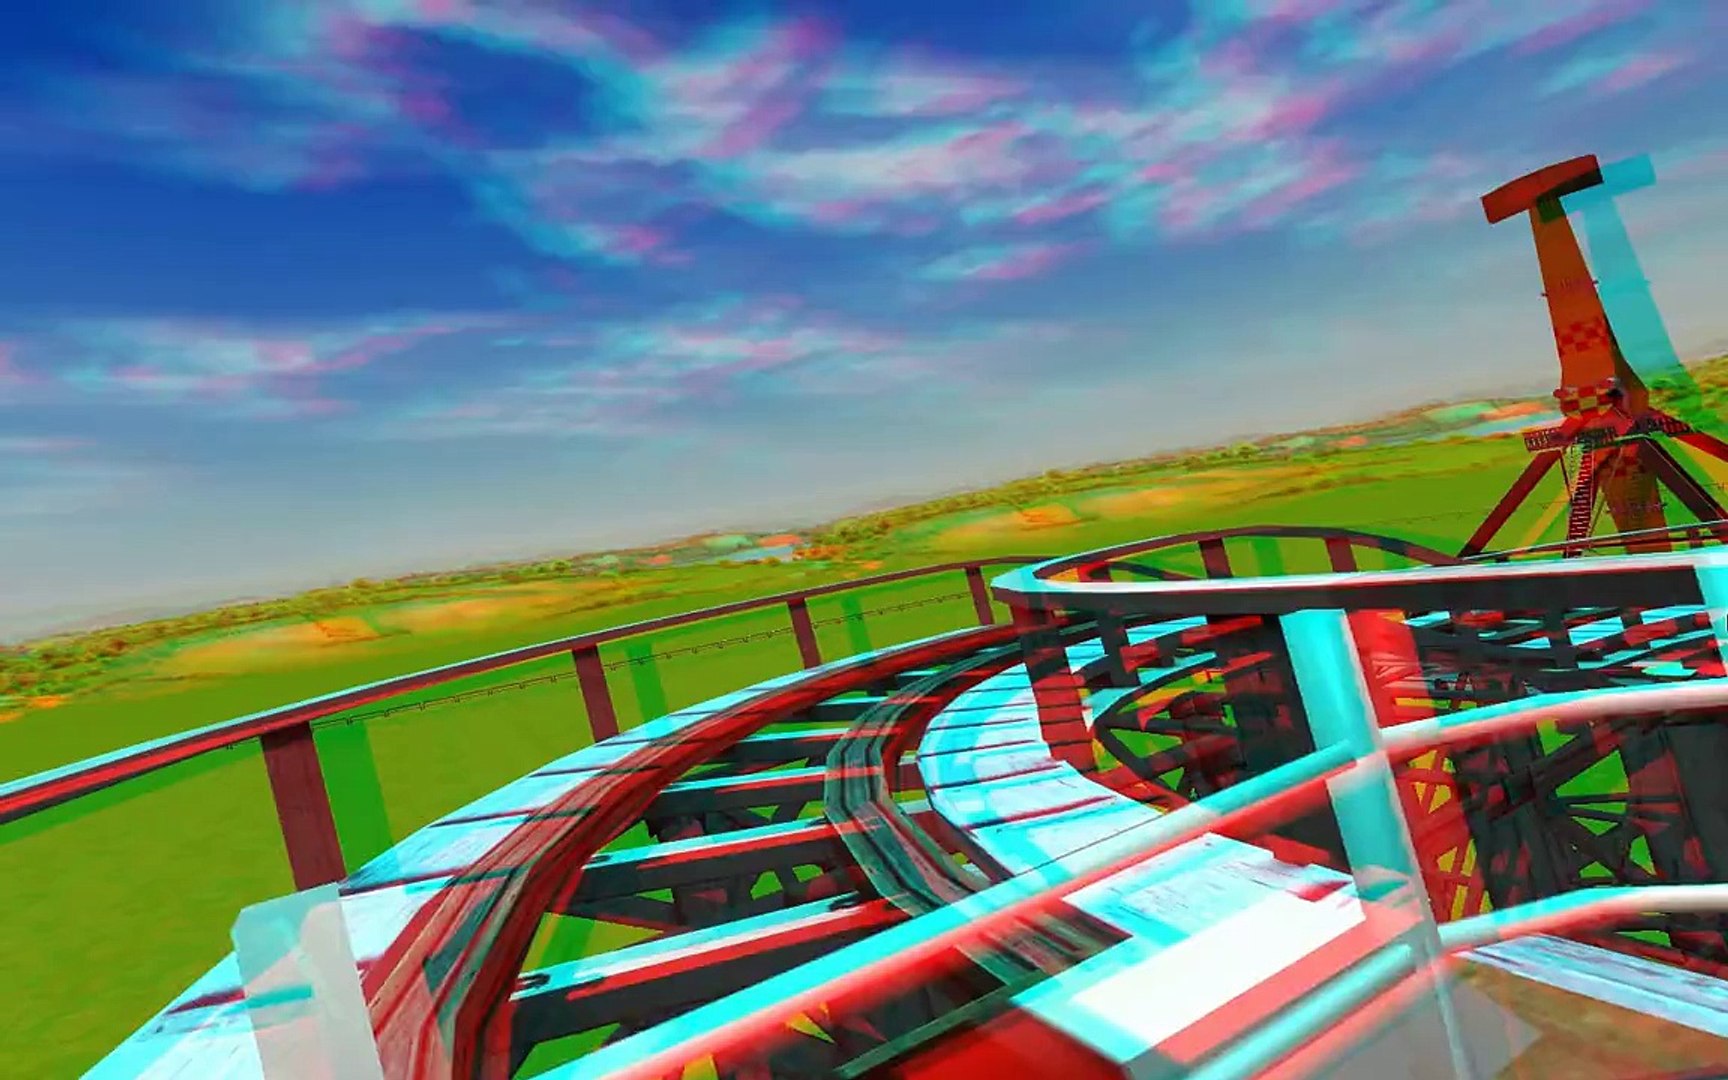 3D - Roller Coaster Tycoon 3 - Stereo 3D anaglyph Test Red Cyan Glasses -  Dailymotion Video